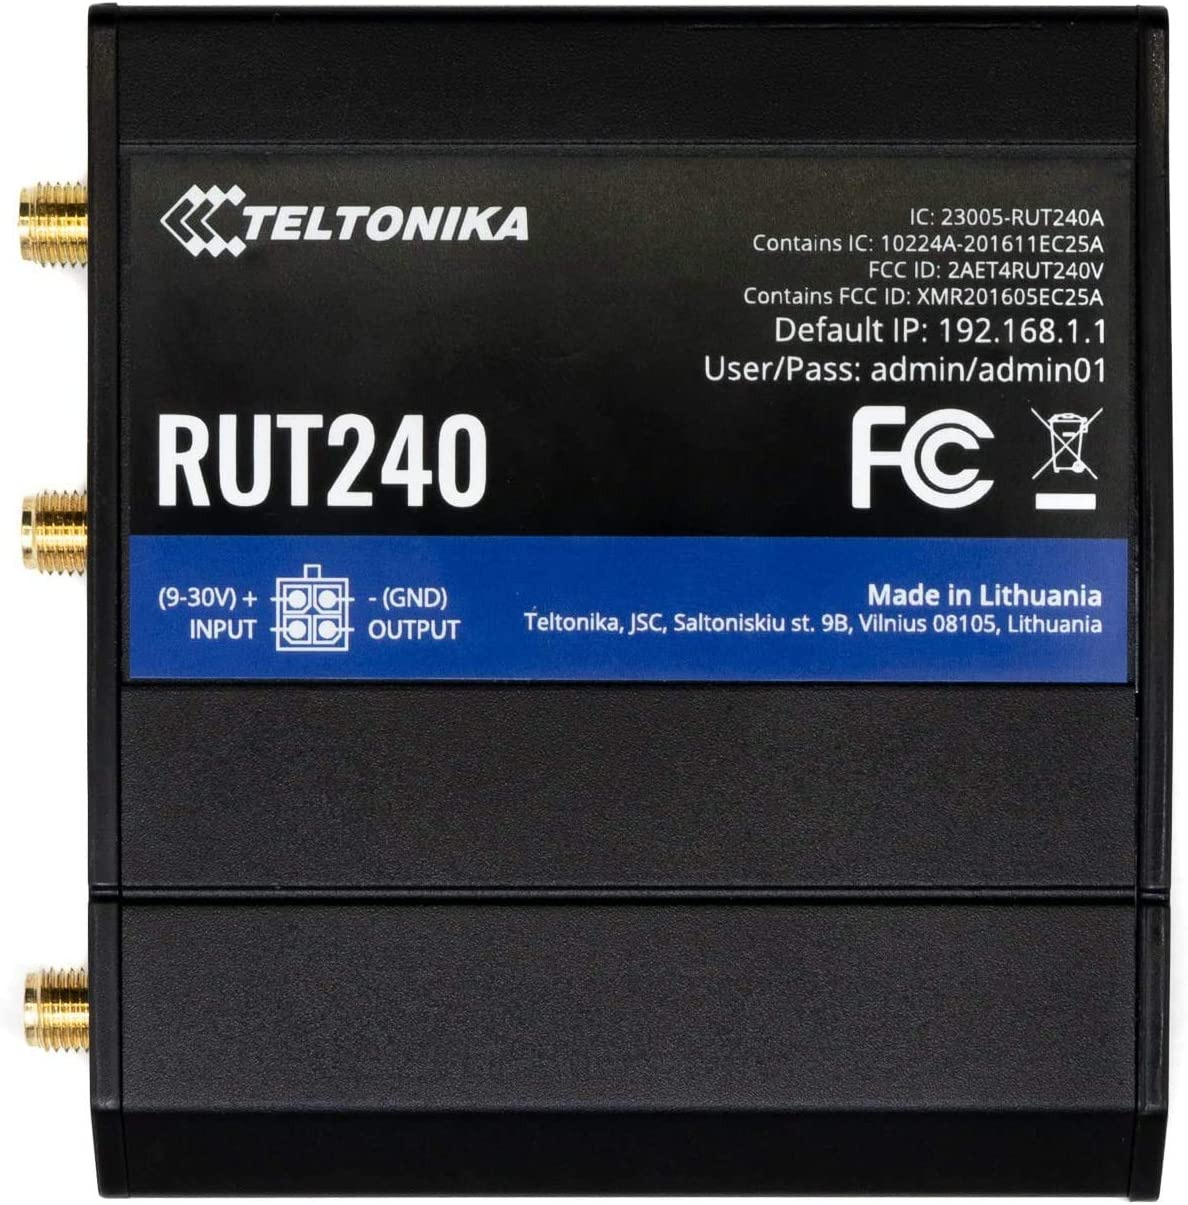 RUT240 4G /LTE & Wifi Cellular Router with Ethernet and I/O, Remote Connection, 